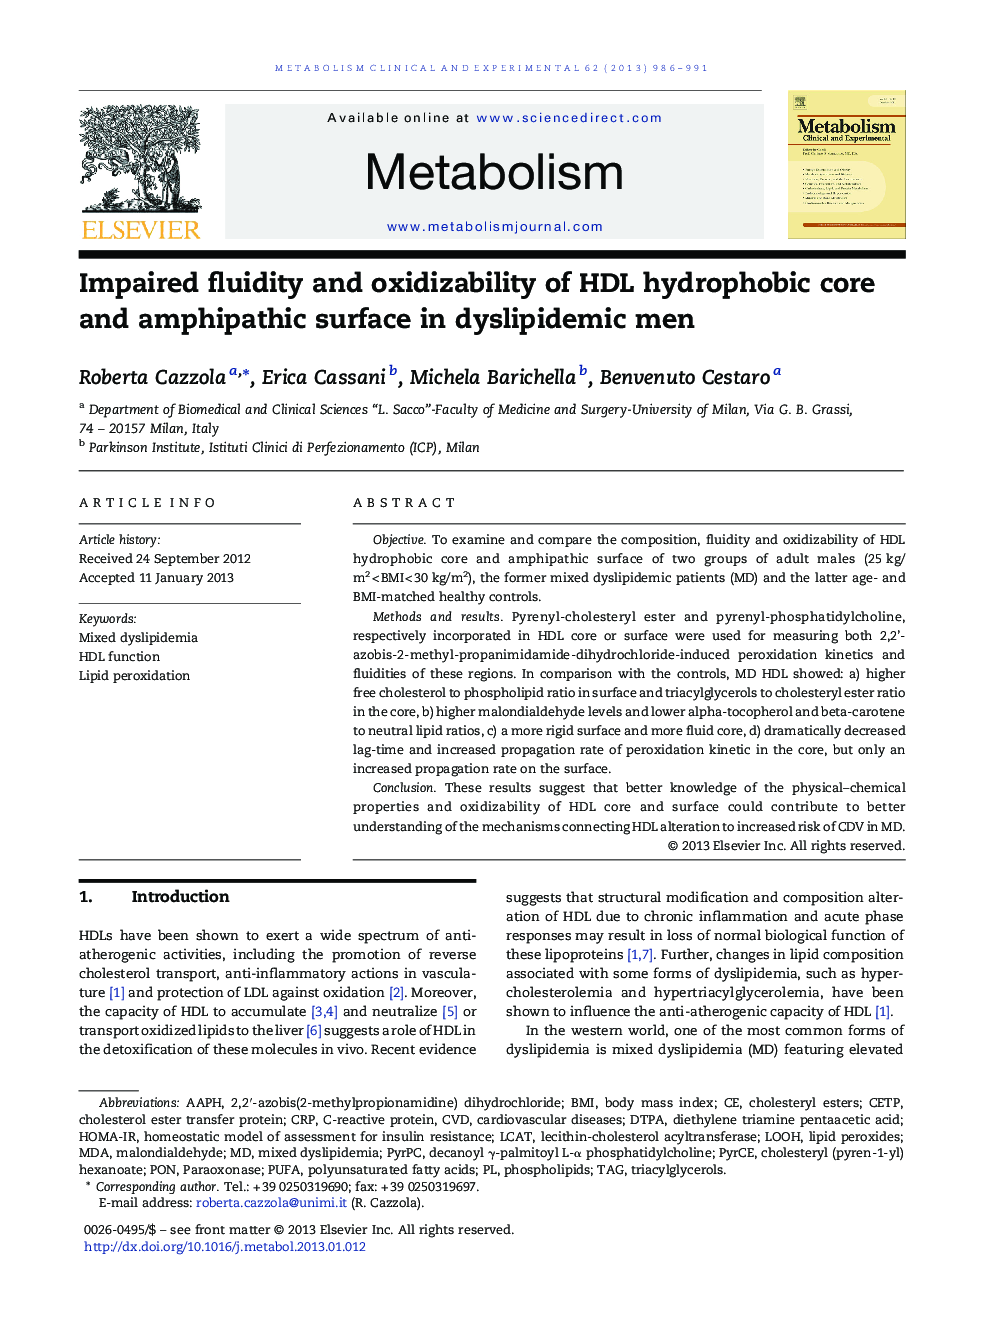 Impaired fluidity and oxidizability of HDL hydrophobic core and amphipathic surface in dyslipidemic men